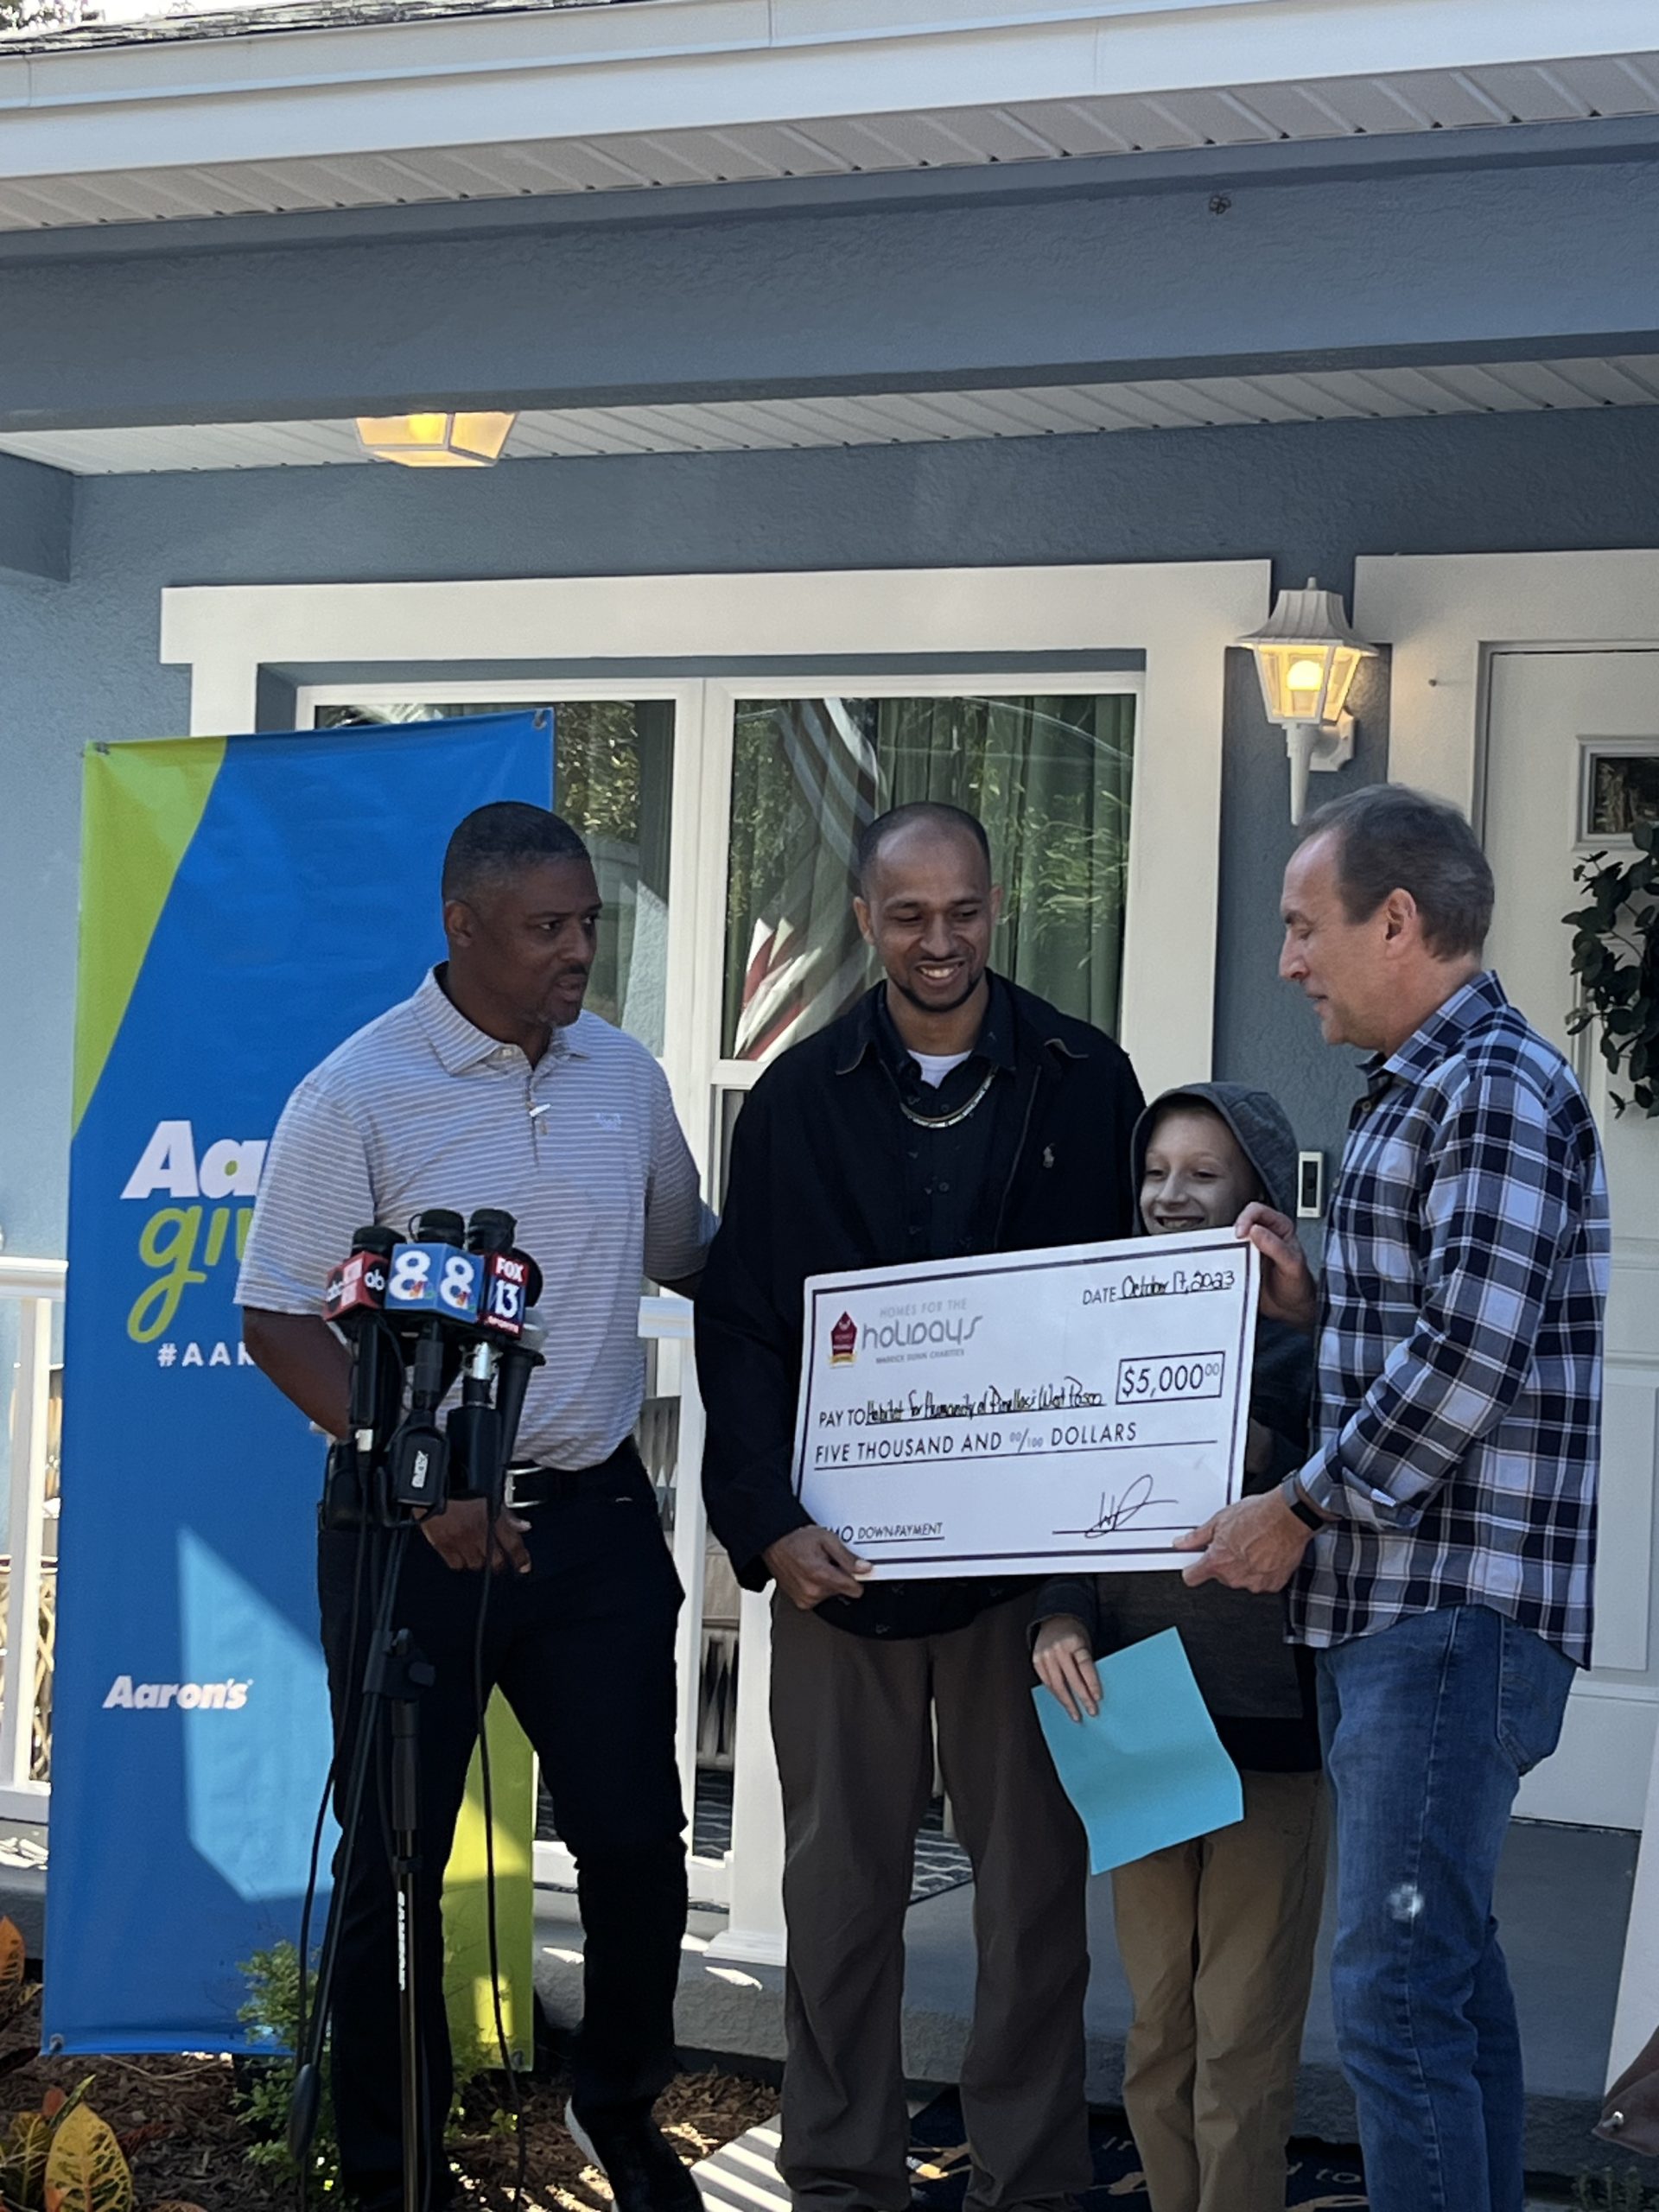 Former NFL player gives check to Florida dad toward dream home